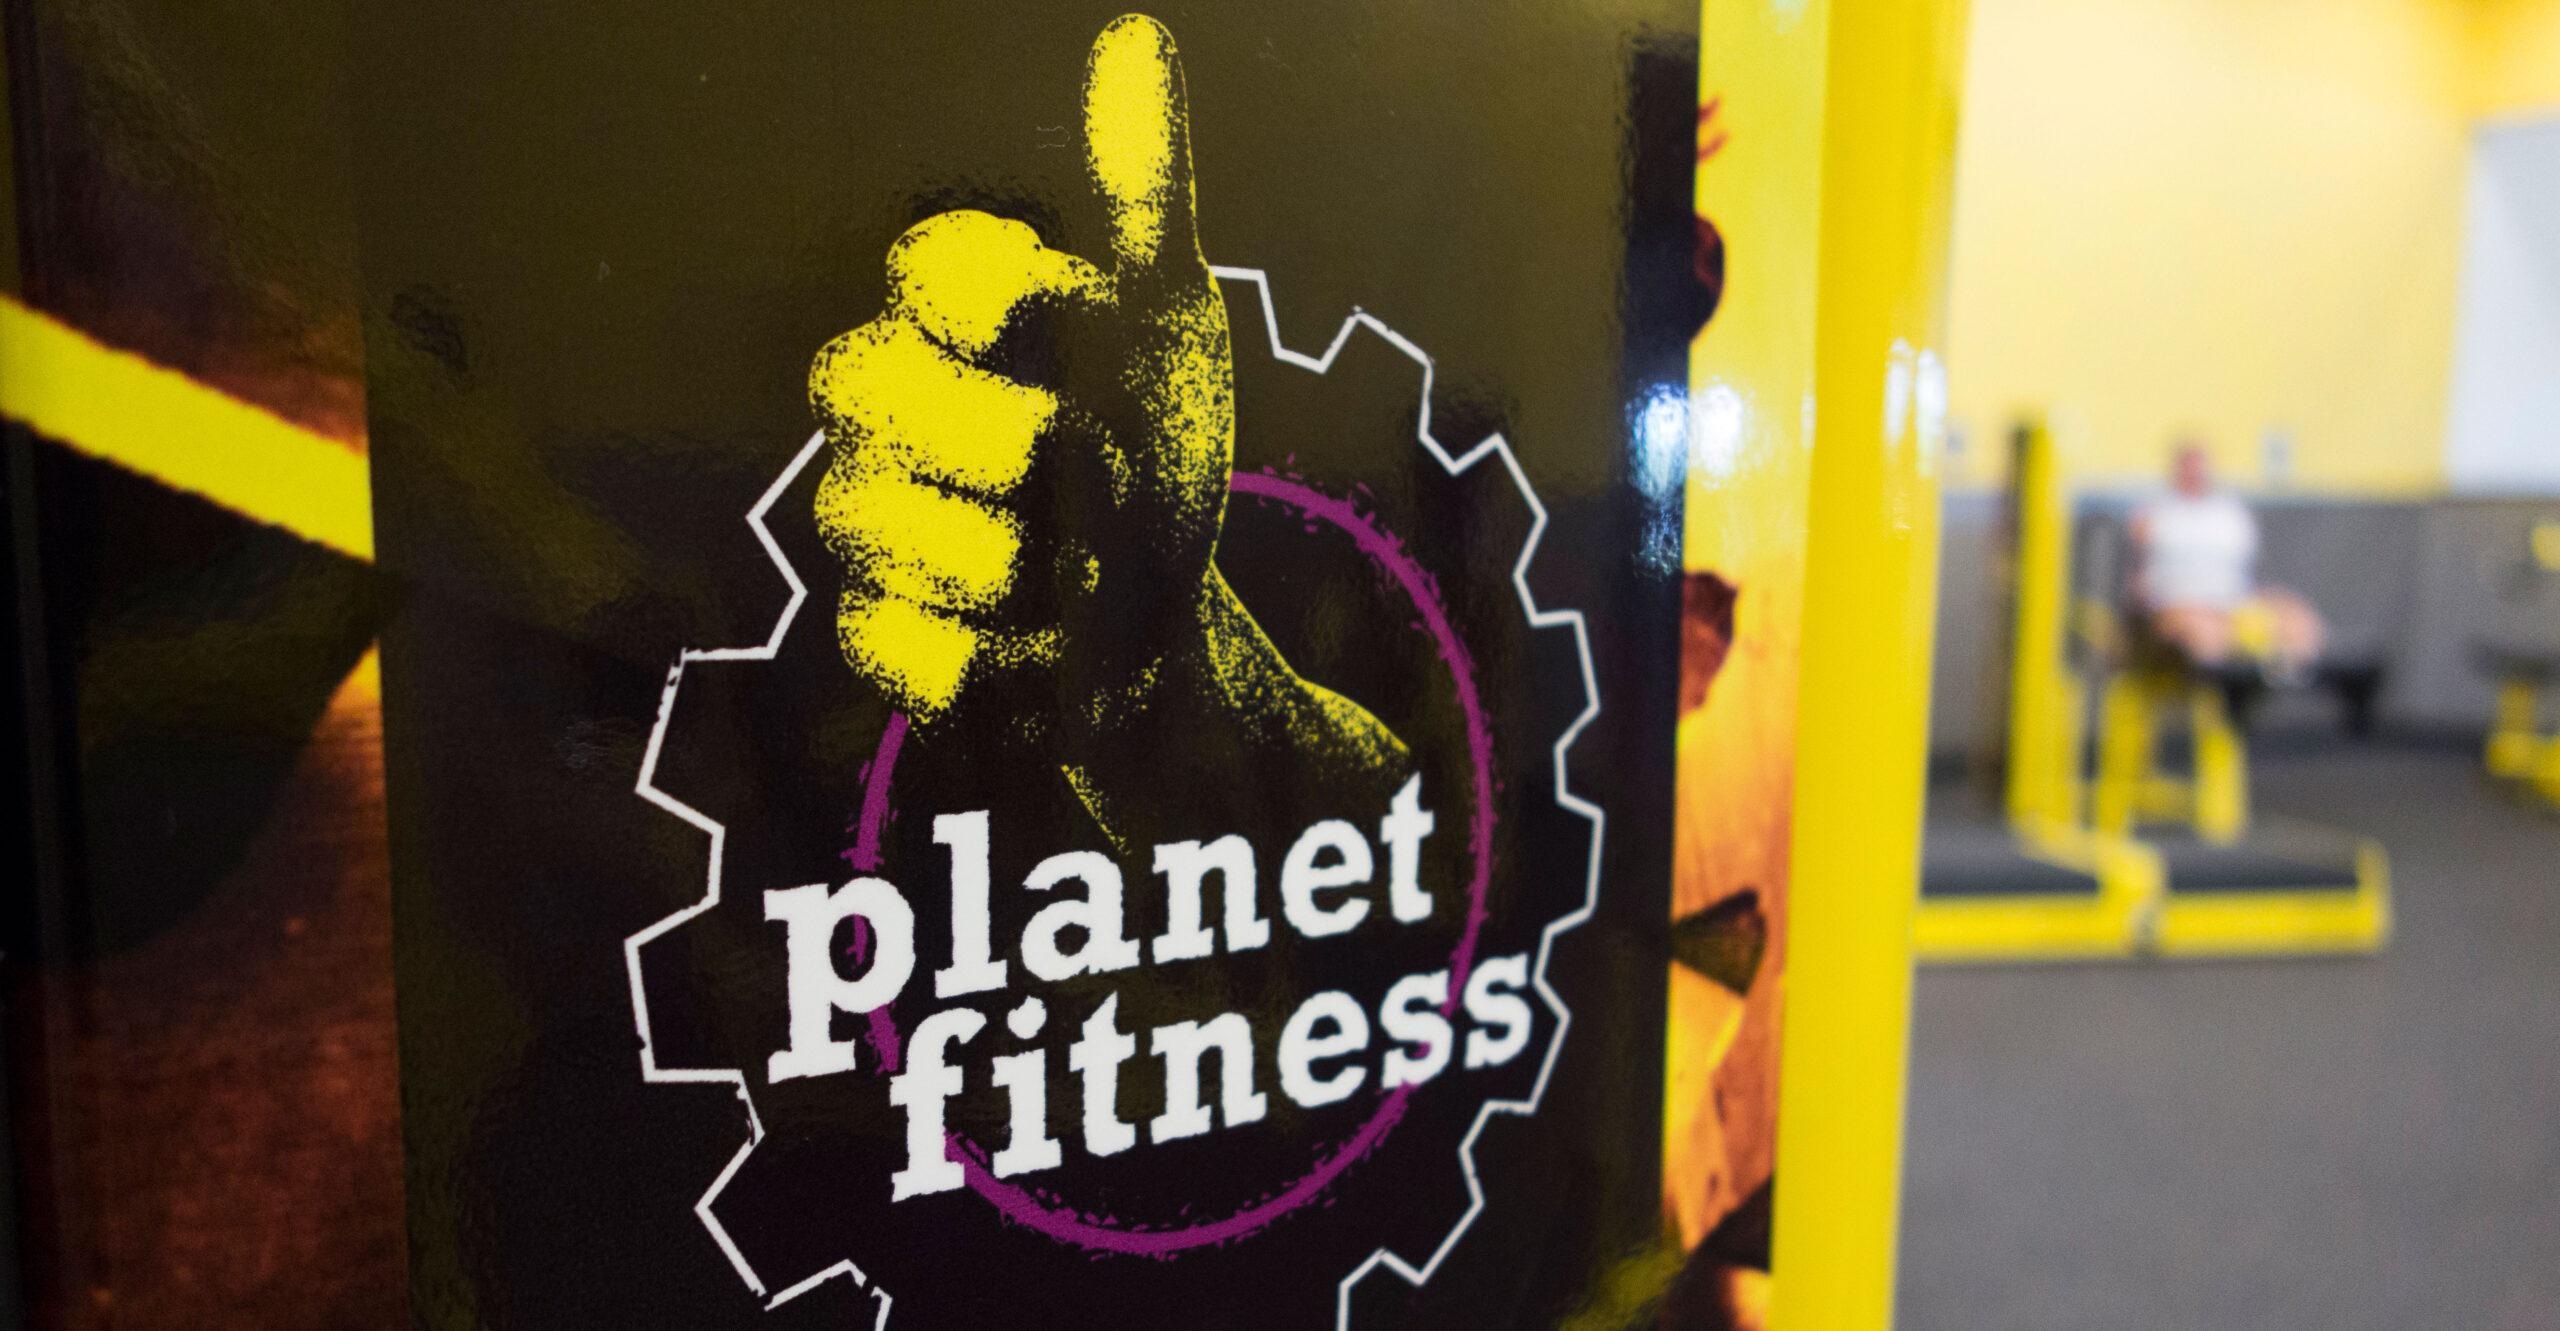 Earth to Planet Fitness: Women Don't Want to Share Locker Rooms With Faux Females